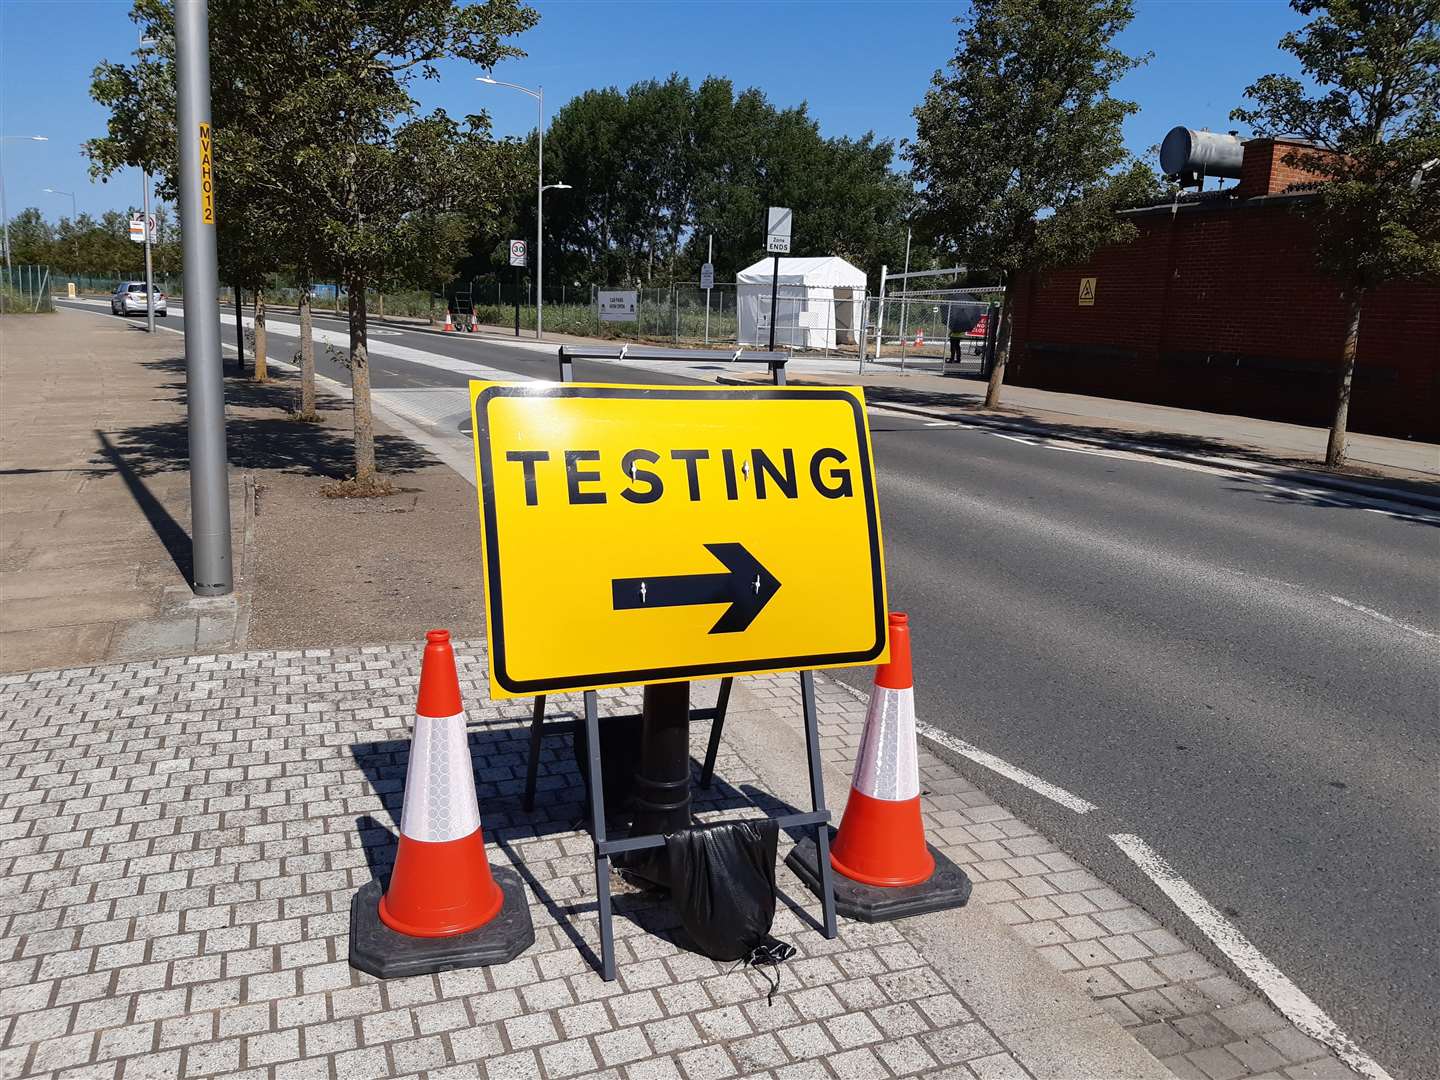 Drivers entering the county with symptoms will need testing and to self isolate